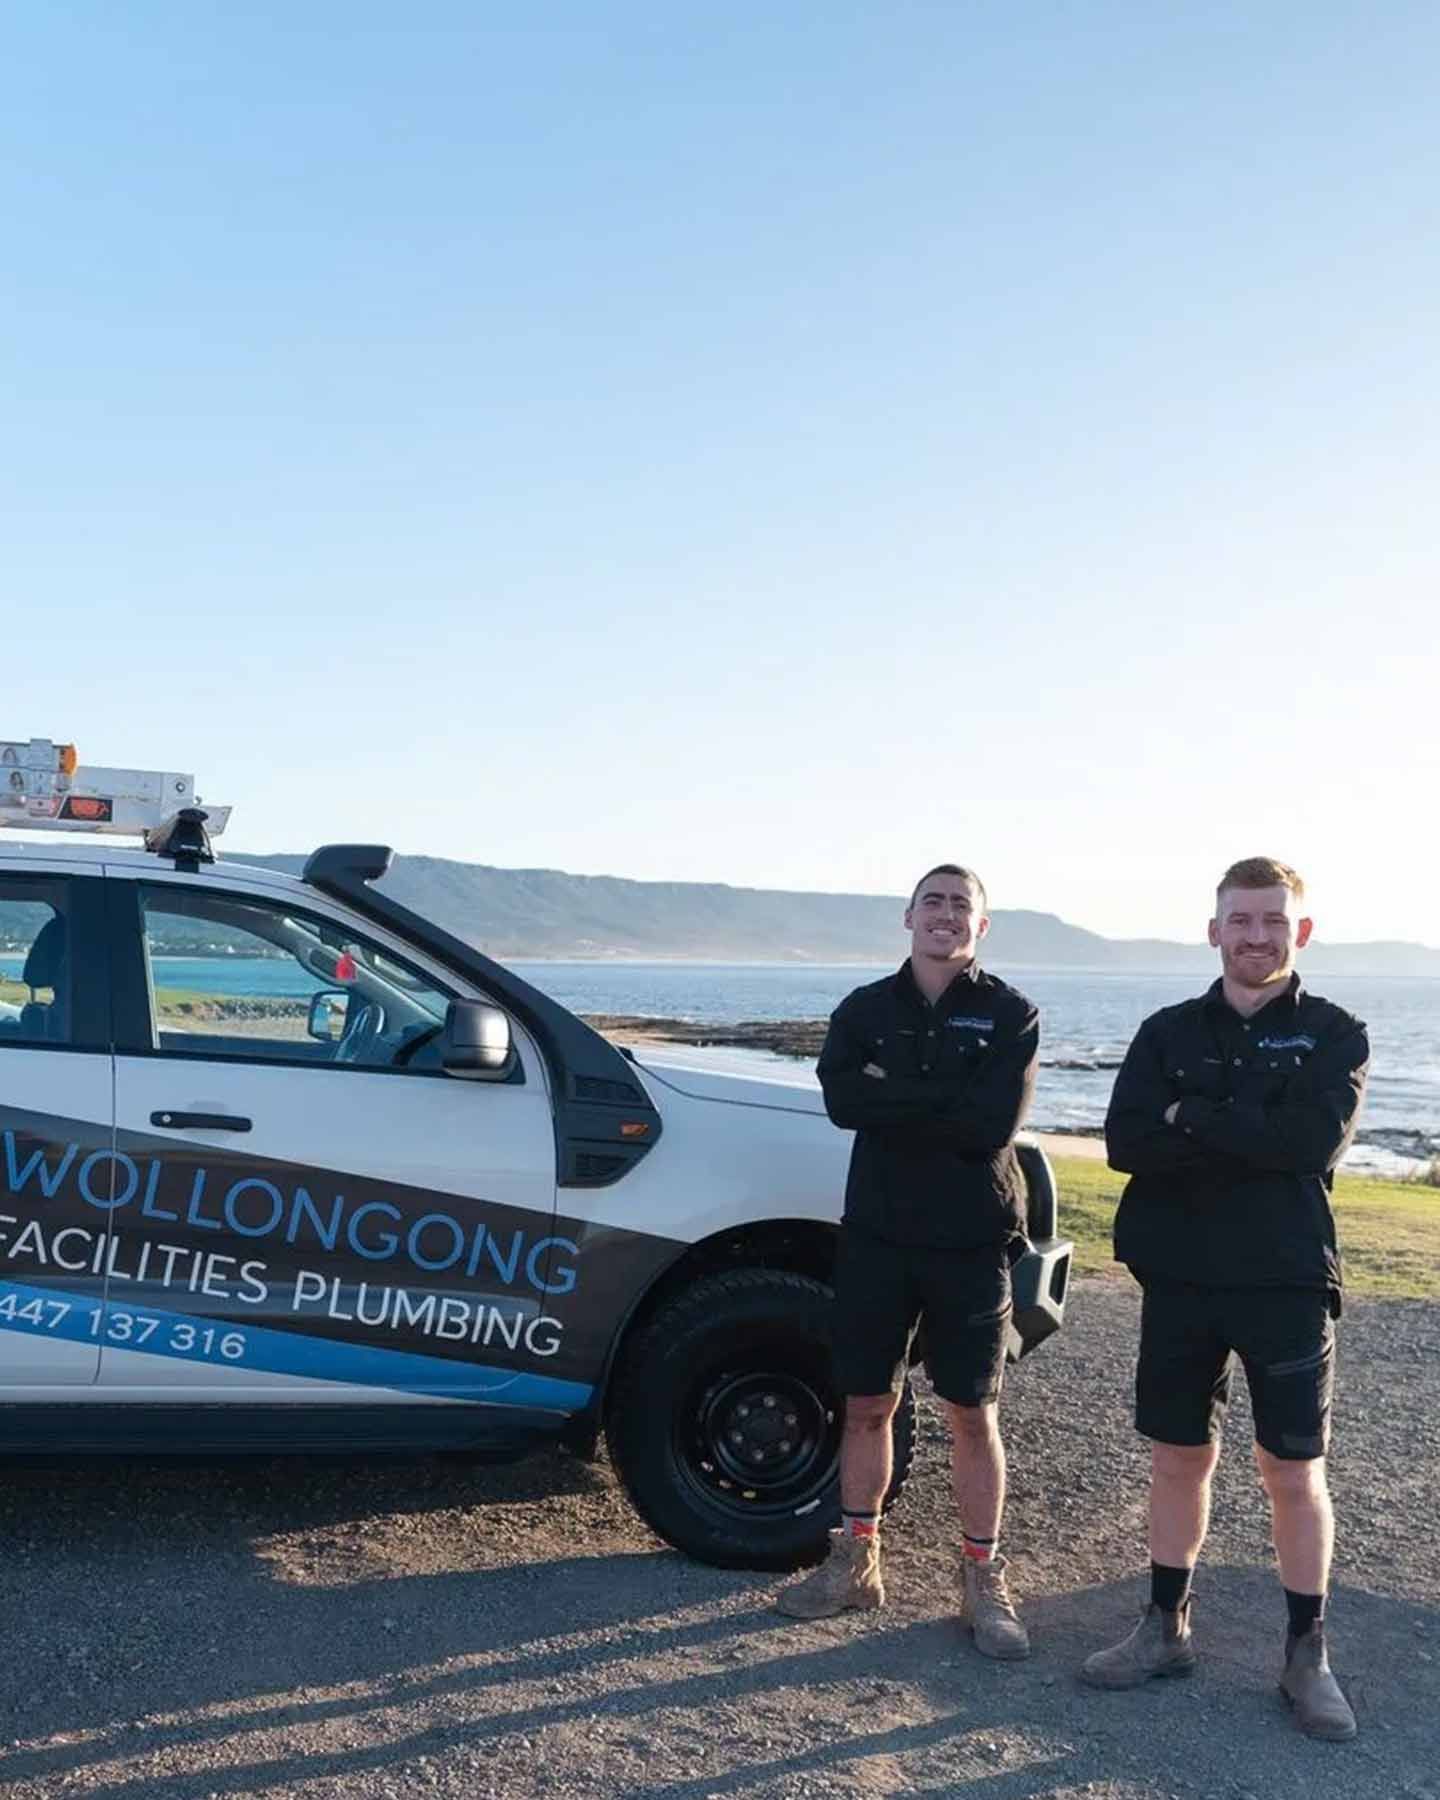 Wollongong Plumbers Standing By Car — Plumber in Wollongong, NSW